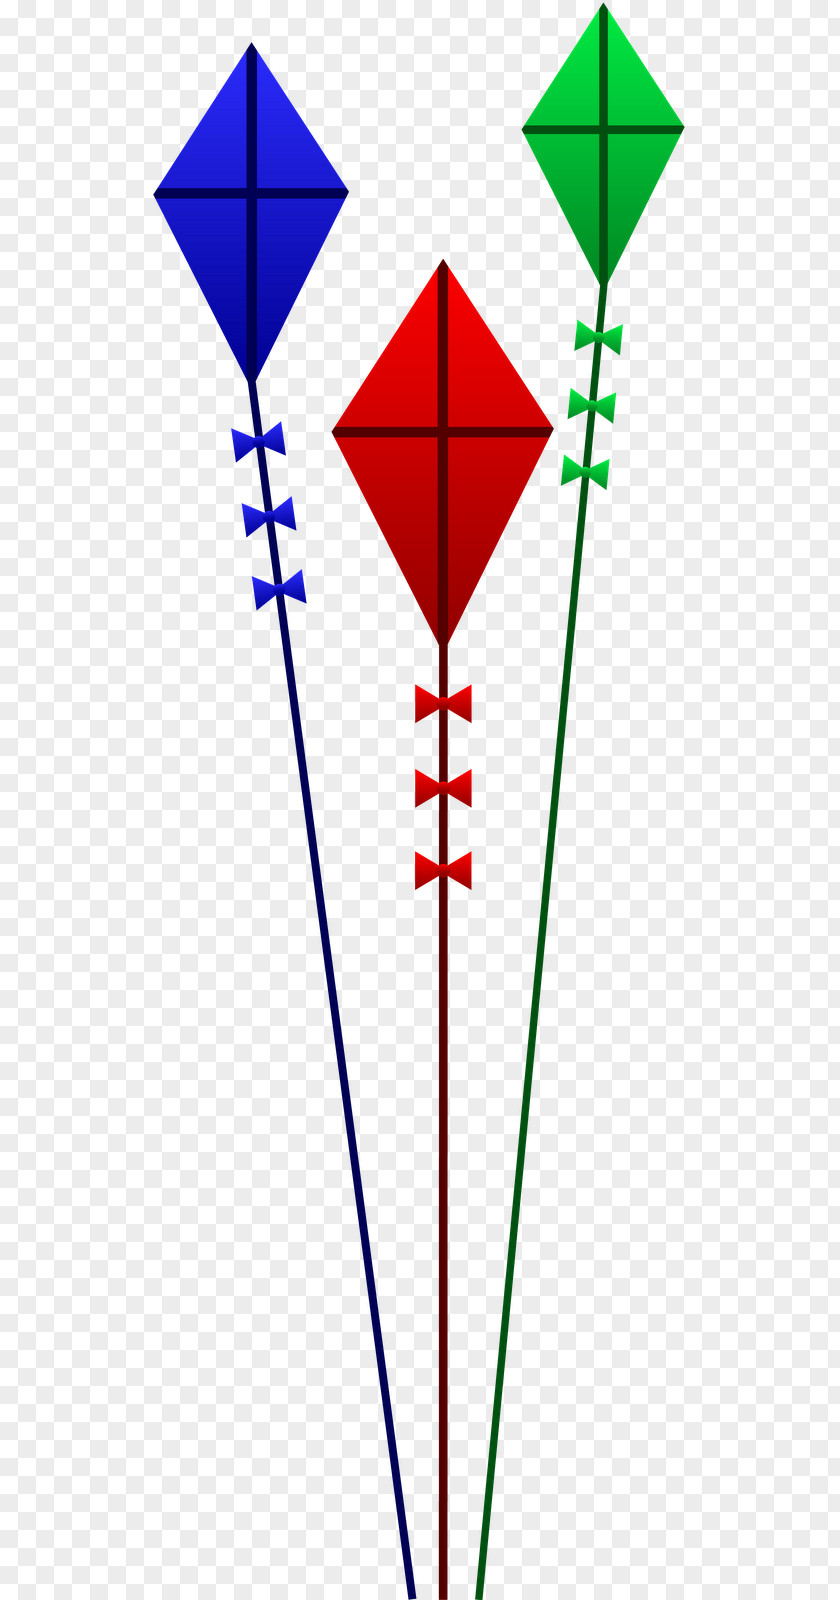 Fly A Kite In The Air Clip Art PNG